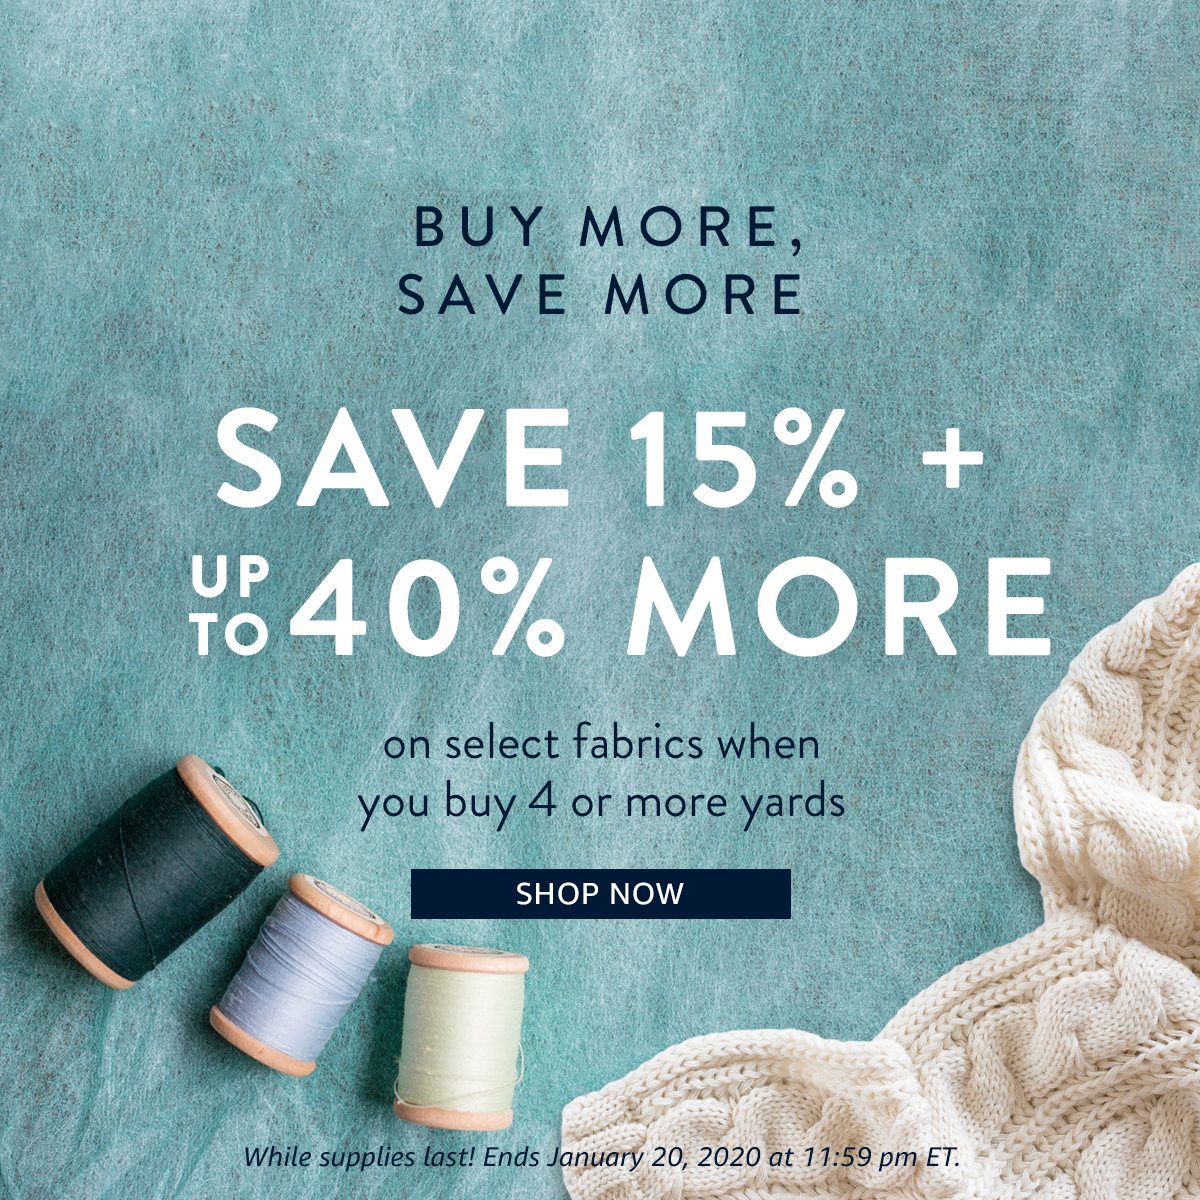 BUY MORE, SAVE MORE | SAVE 15% + UP TO 40% MORE | SHOP NOW | While supplies last! Ends January 20, 2020 at 11:59 pm ET.